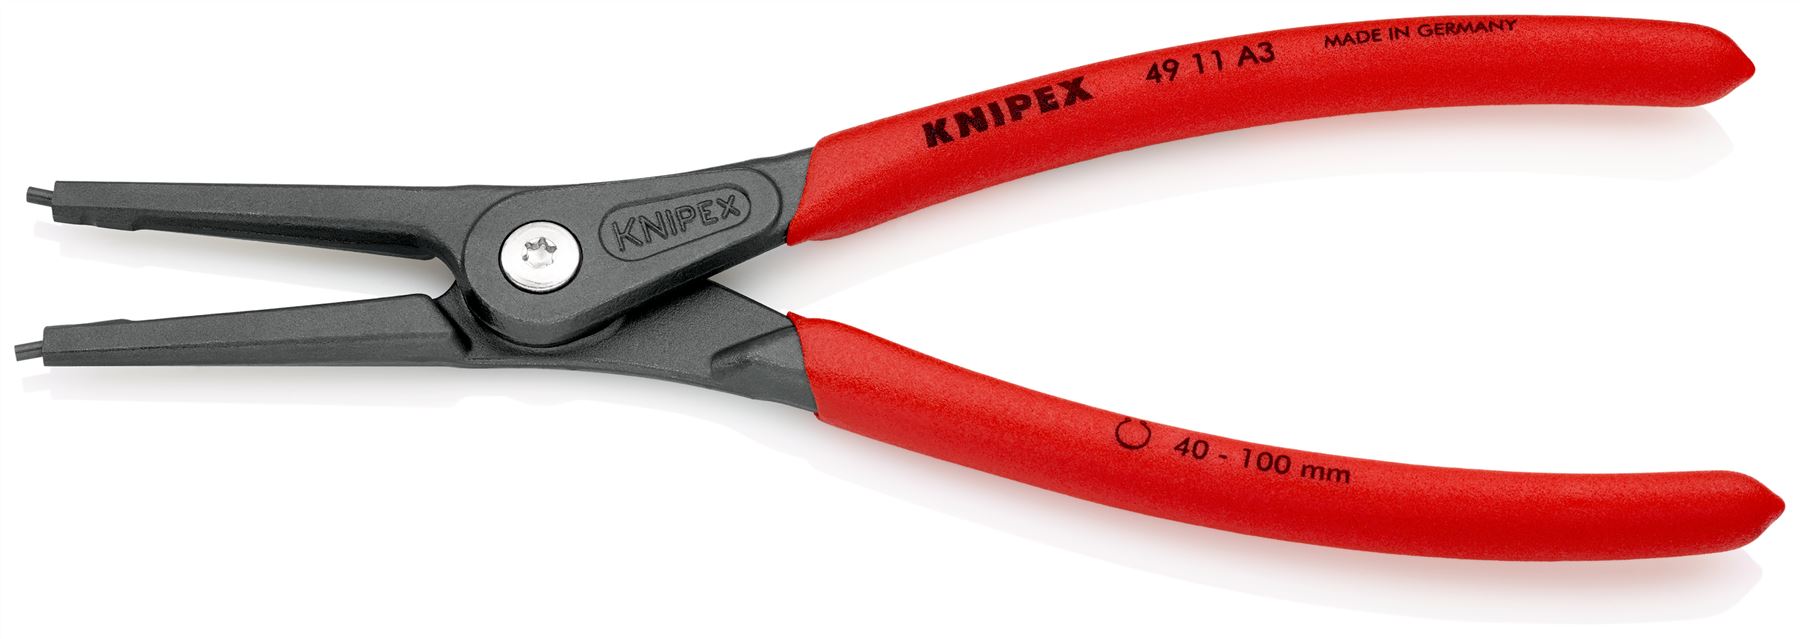 KNIPEX Precision Circlip Pliers for External Circlips on Shafts 225mm 2.3mm Diameter Tips 49 11 A3